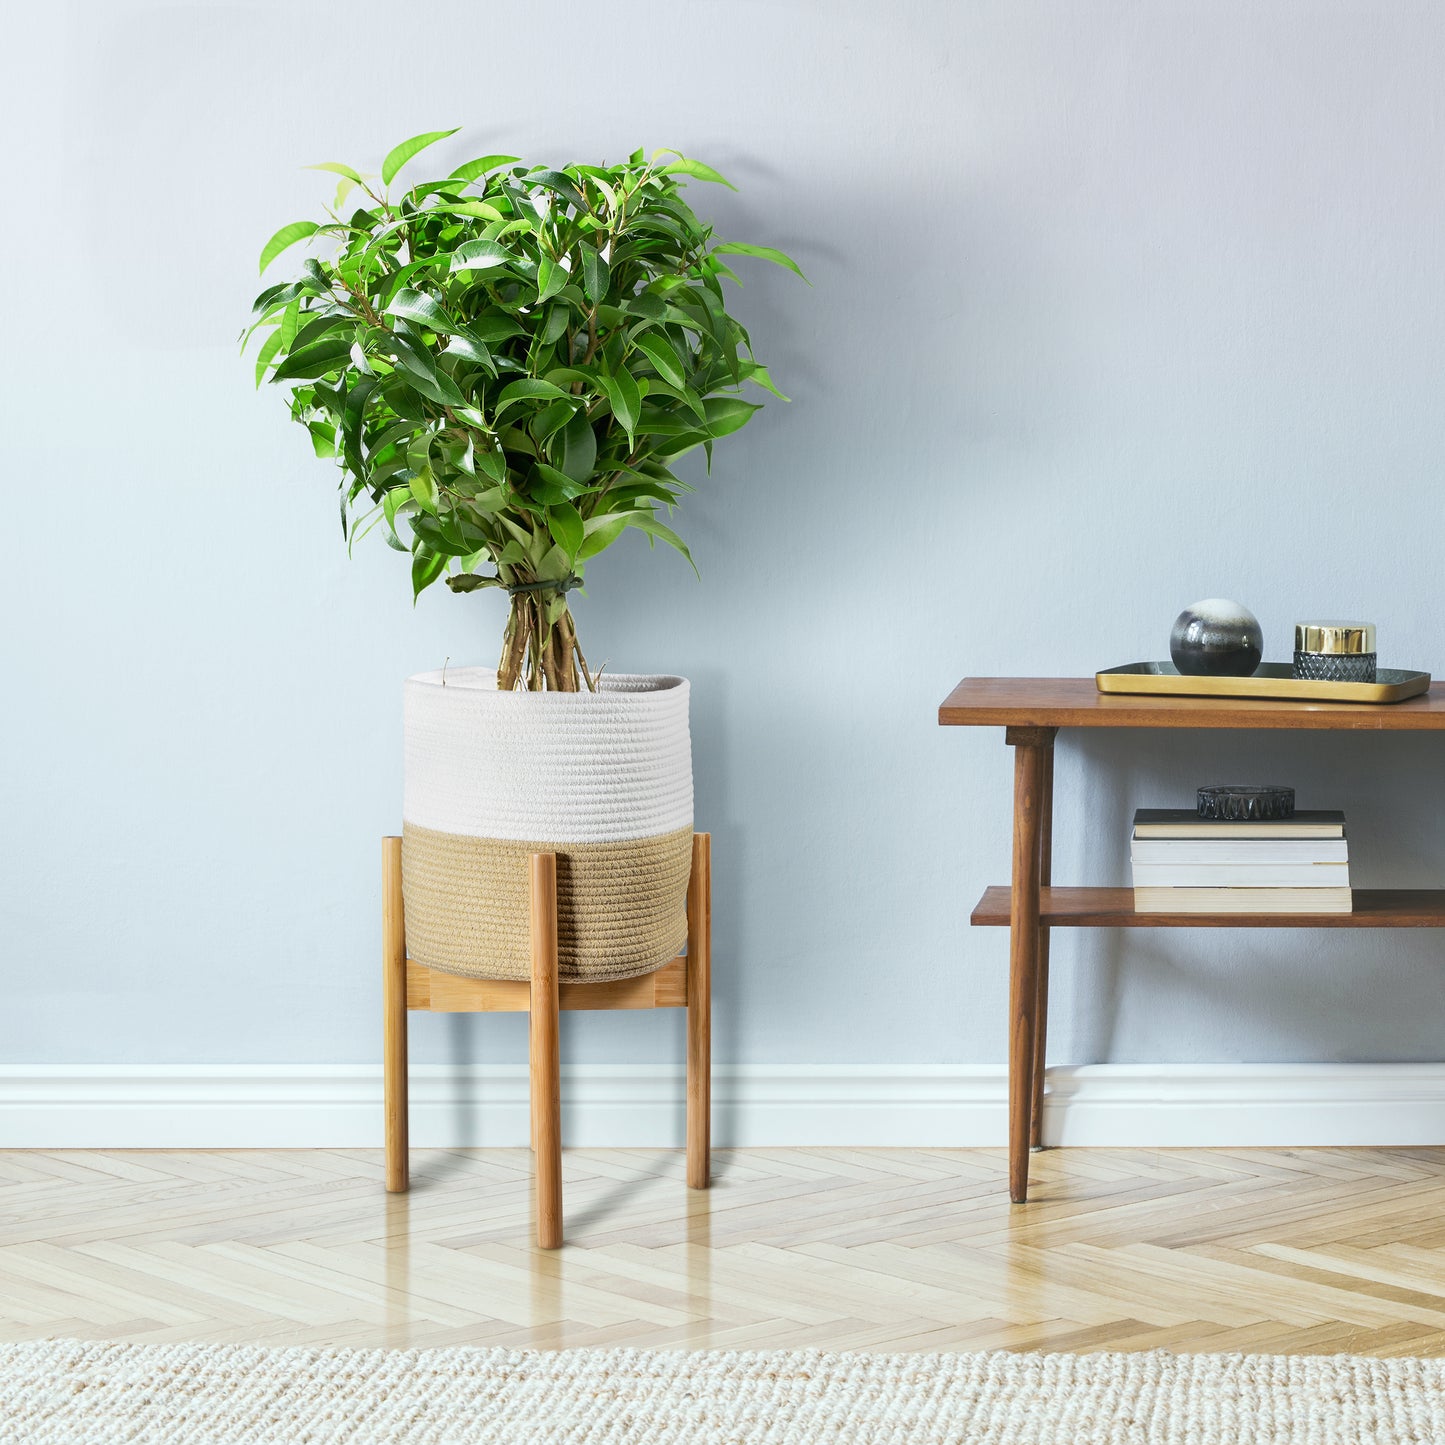 Alfie & Gem's adjustable plant stand does not require any major assembly or diys. Our wooden house plant stand are very easy to assemble, and can be adjusted easily to fit medium to large pots. These indoor plant stands are the perfect addition to farmhouse, rustic, minimalist, and mid-century modern decor styles. Great for indoor and outdoor plants.